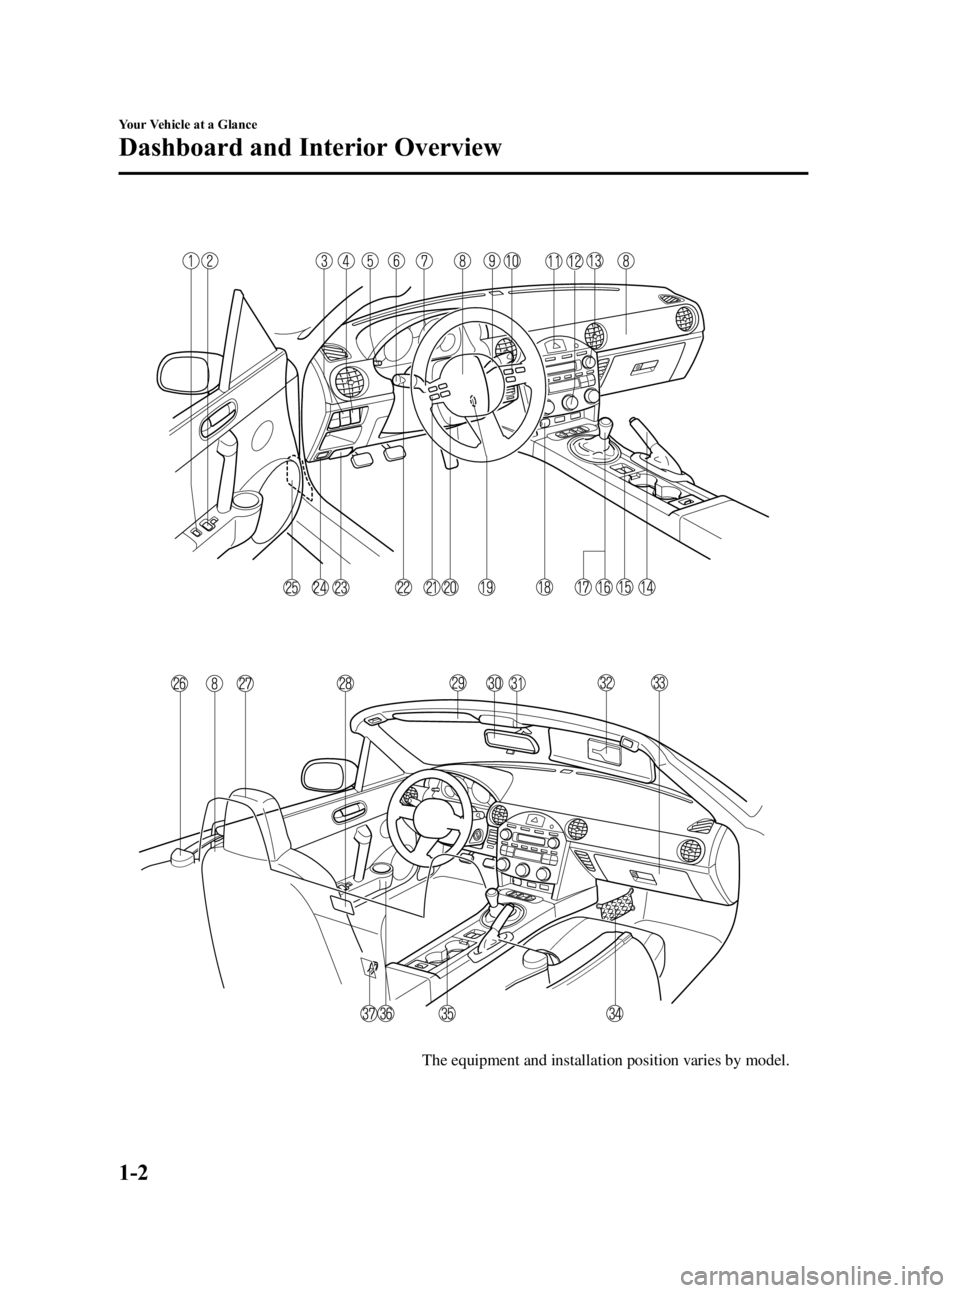 MAZDA MODEL MX-5 MIATA 2006  Owners Manual Black plate (8,1)
The equipment and installation position varies by model.
1-2
Your Vehicle at a Glance
Dashboard and Interior Overview
MX-5_8U35-EA-05F_Edition4 Page8
Thursday, October 6 2005 11:2 AM